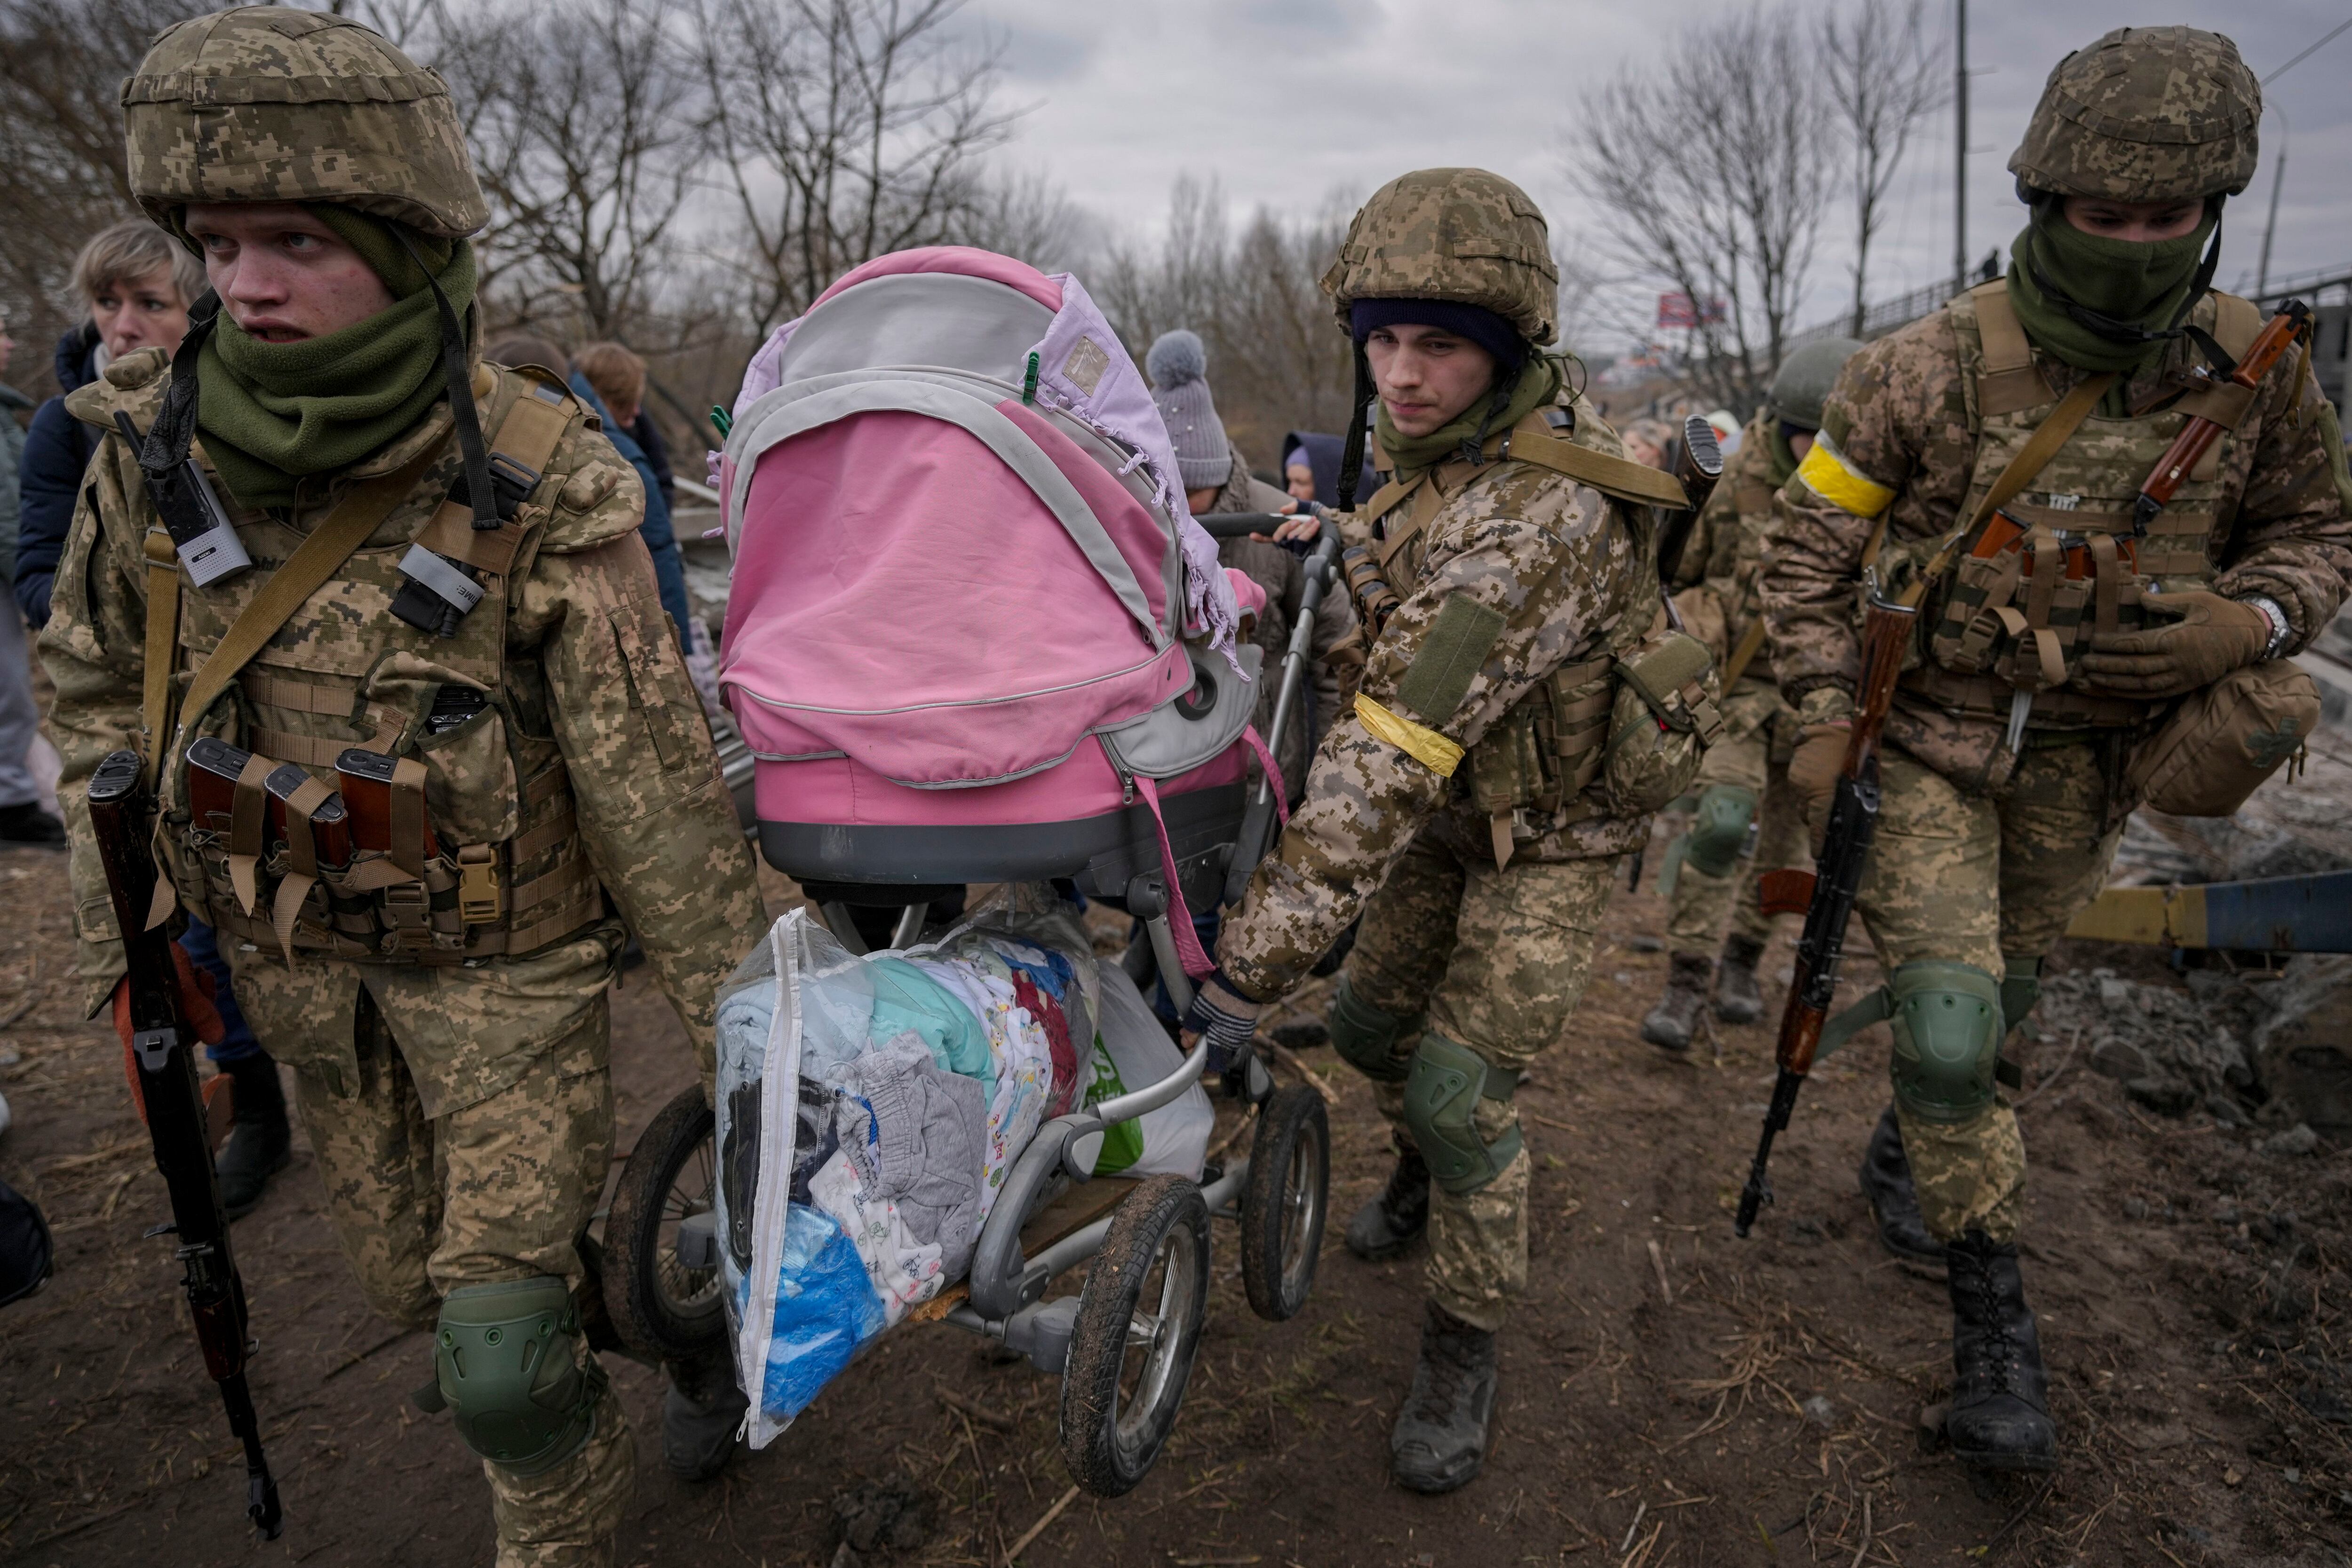 Ukrainian servicemen carry a baby stroller after crossing the Irpin River on an improvised path under a bridge that was destroyed by a Russian airstrike, while assisting people fleeing the town of Irpin, Ukraine, Saturday, March 5, 2022. (Vadim Ghirda/AP)